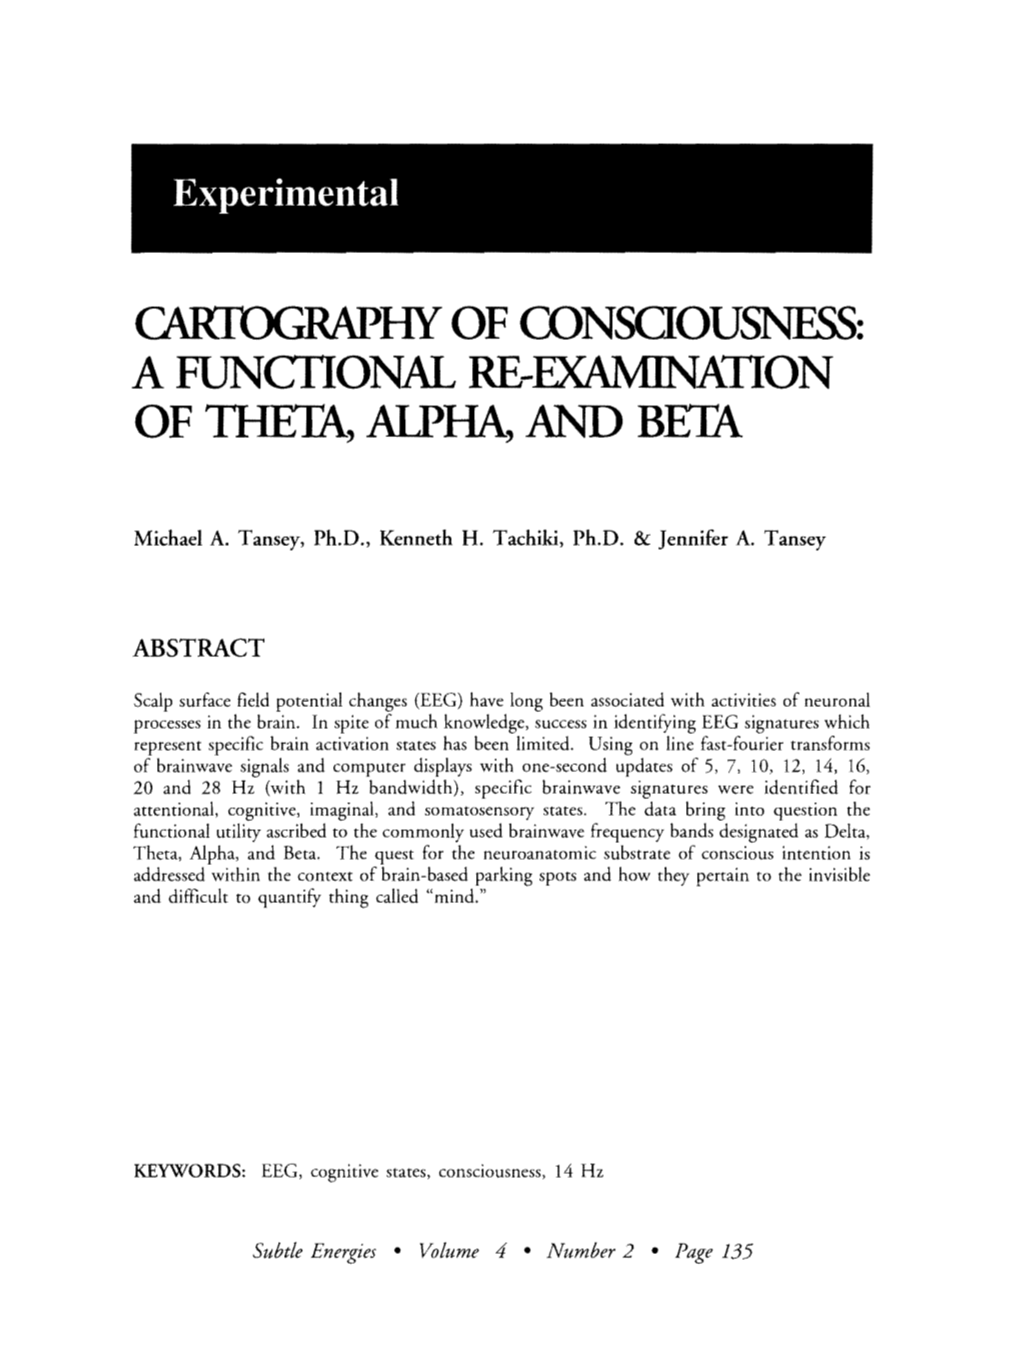 A FUNCTIONAL RE-EXAMINATION of Thera, ALPHA, and BETA